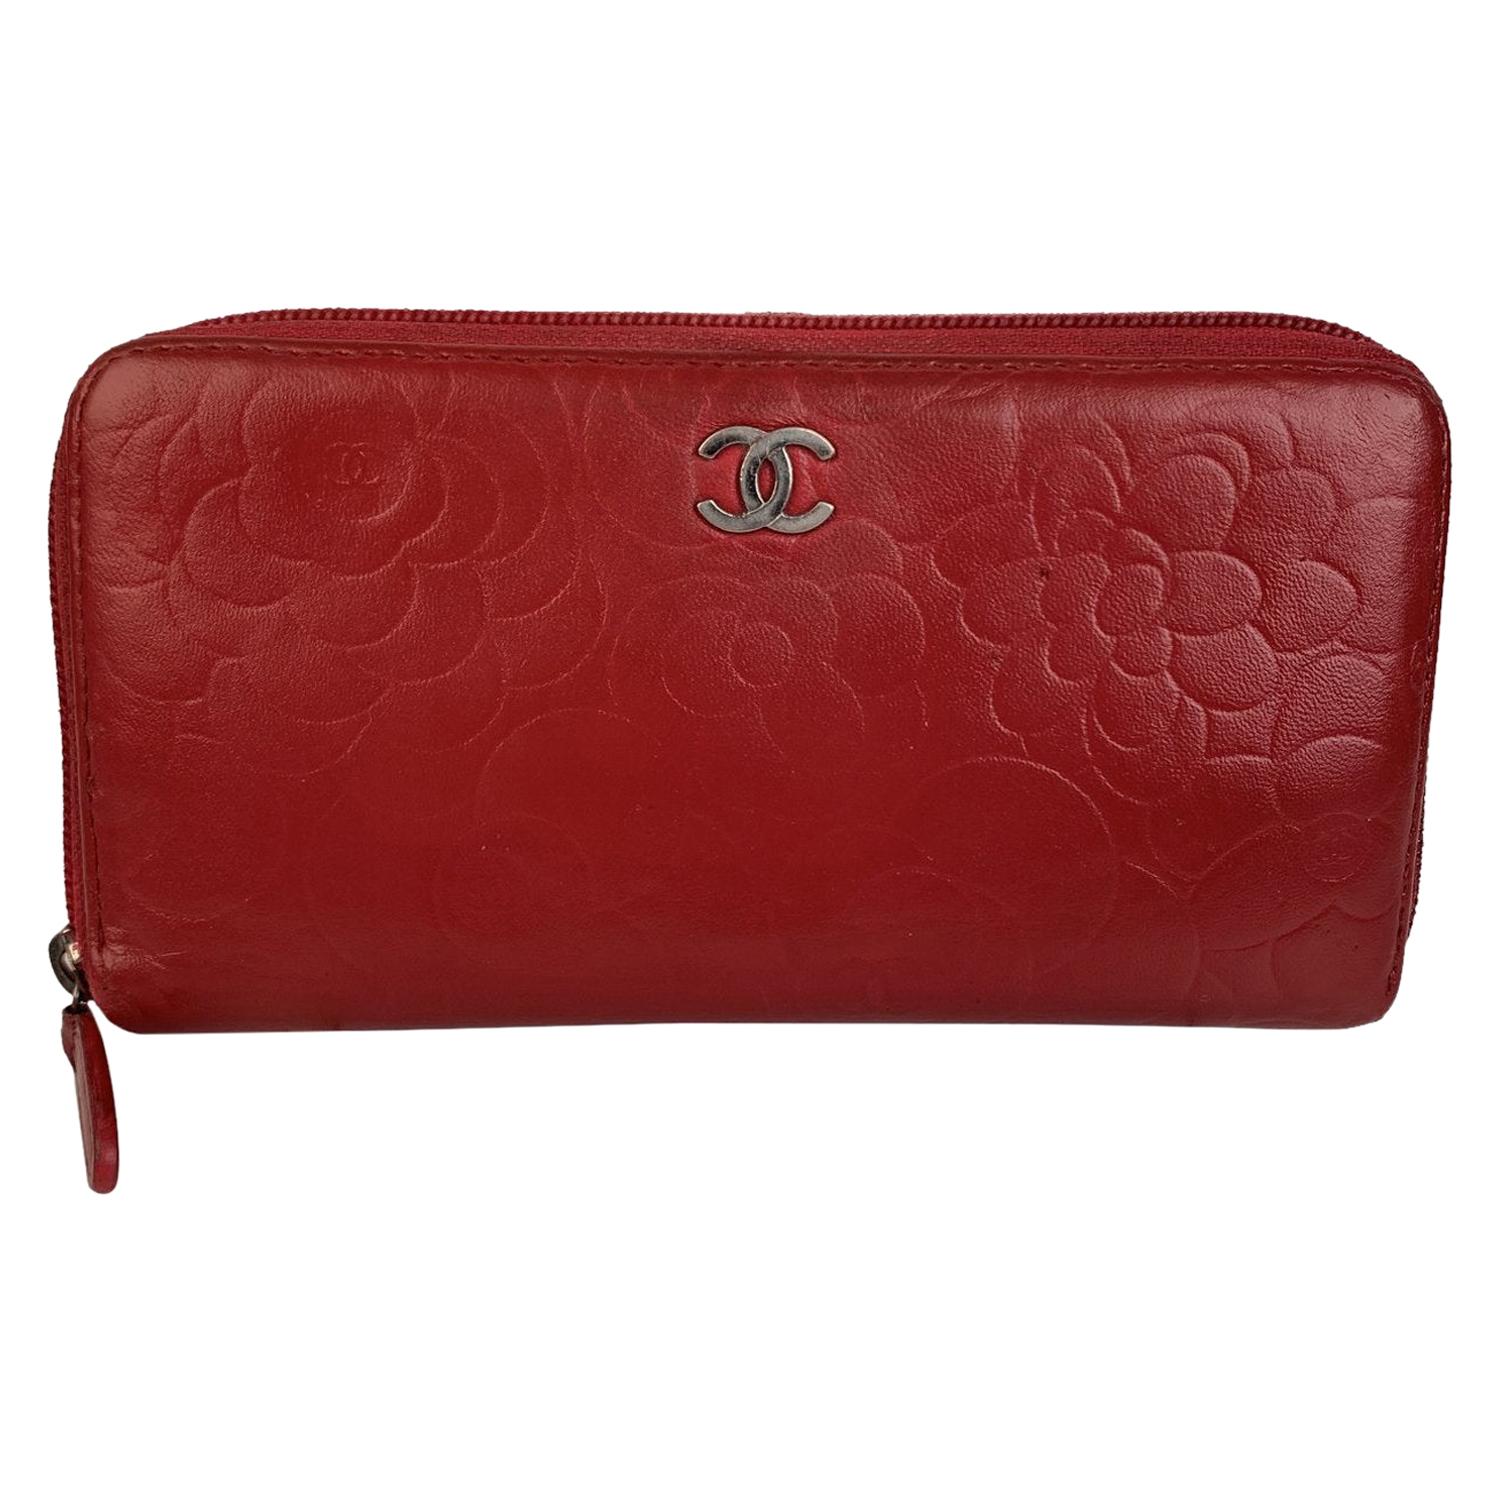 Chanel Red Embossed Leather Camellia Camelia Zip Around Wallet